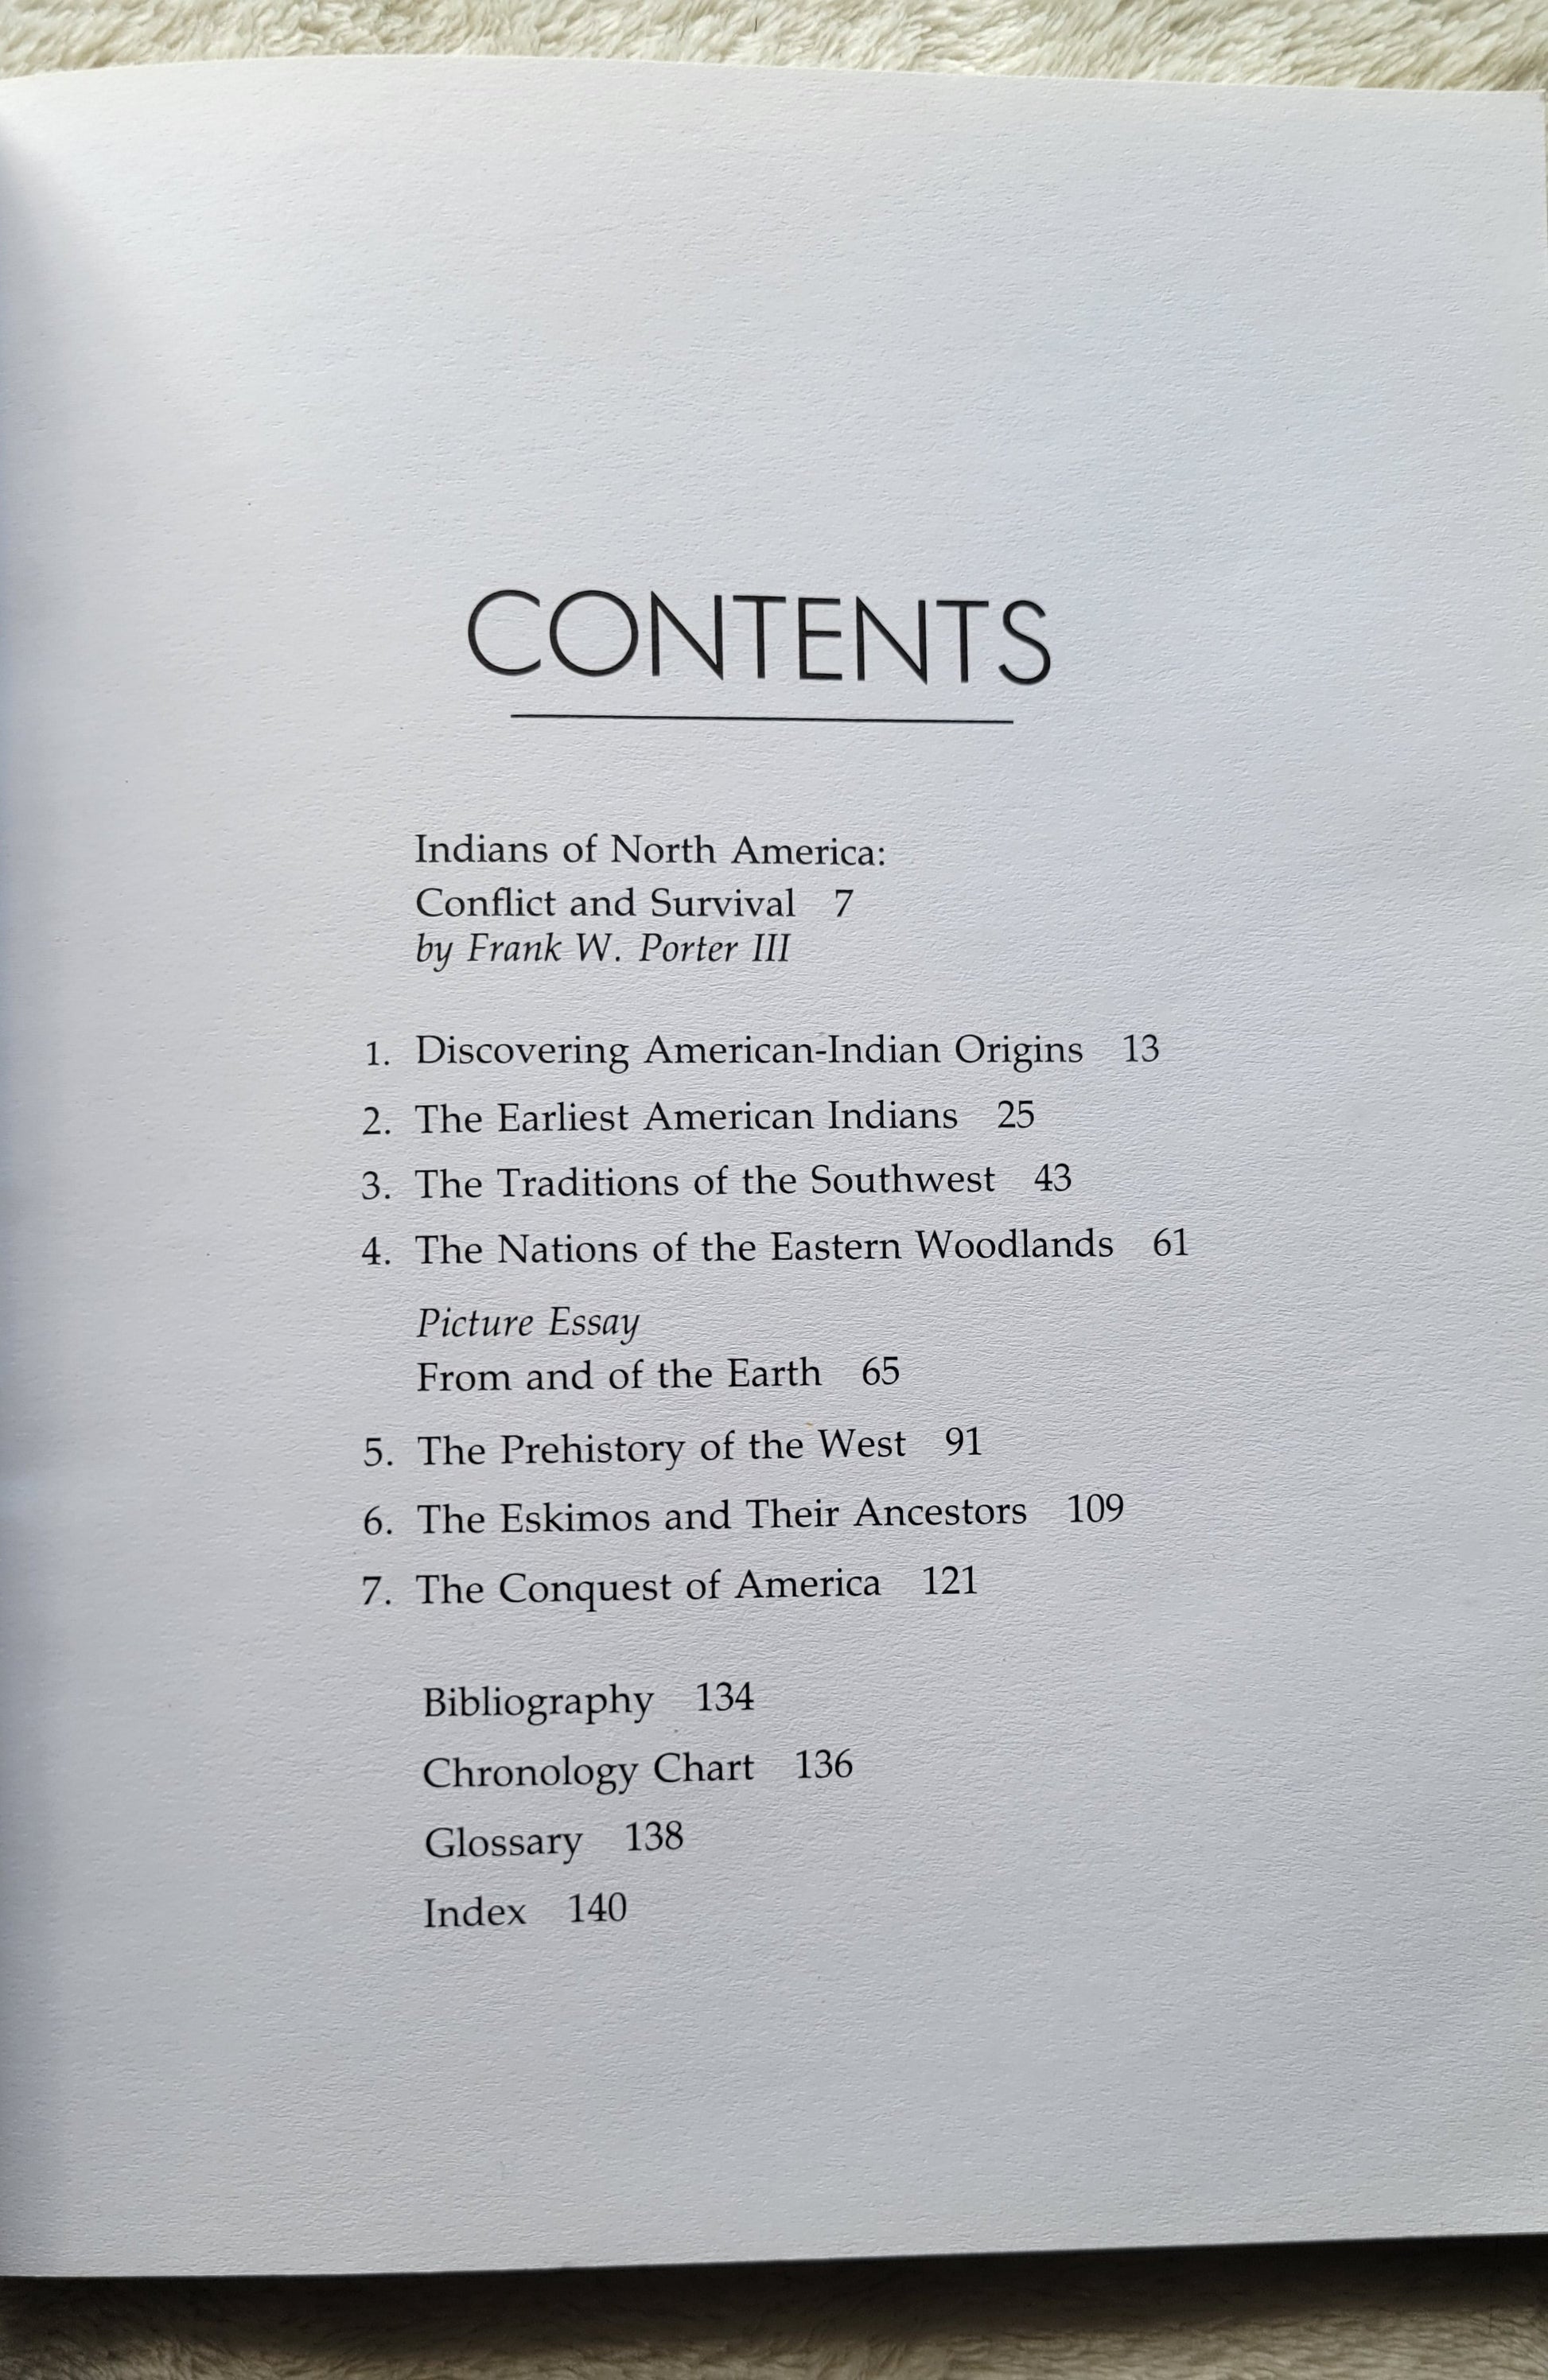 "Archaeology of North America" by Dean R. Snow, Chelsea House publishers, 1989. "Archaeology of North America tells the fascinating story of how archaeologists investigate the origins and prehistory of American Indians.  View of table of contents.